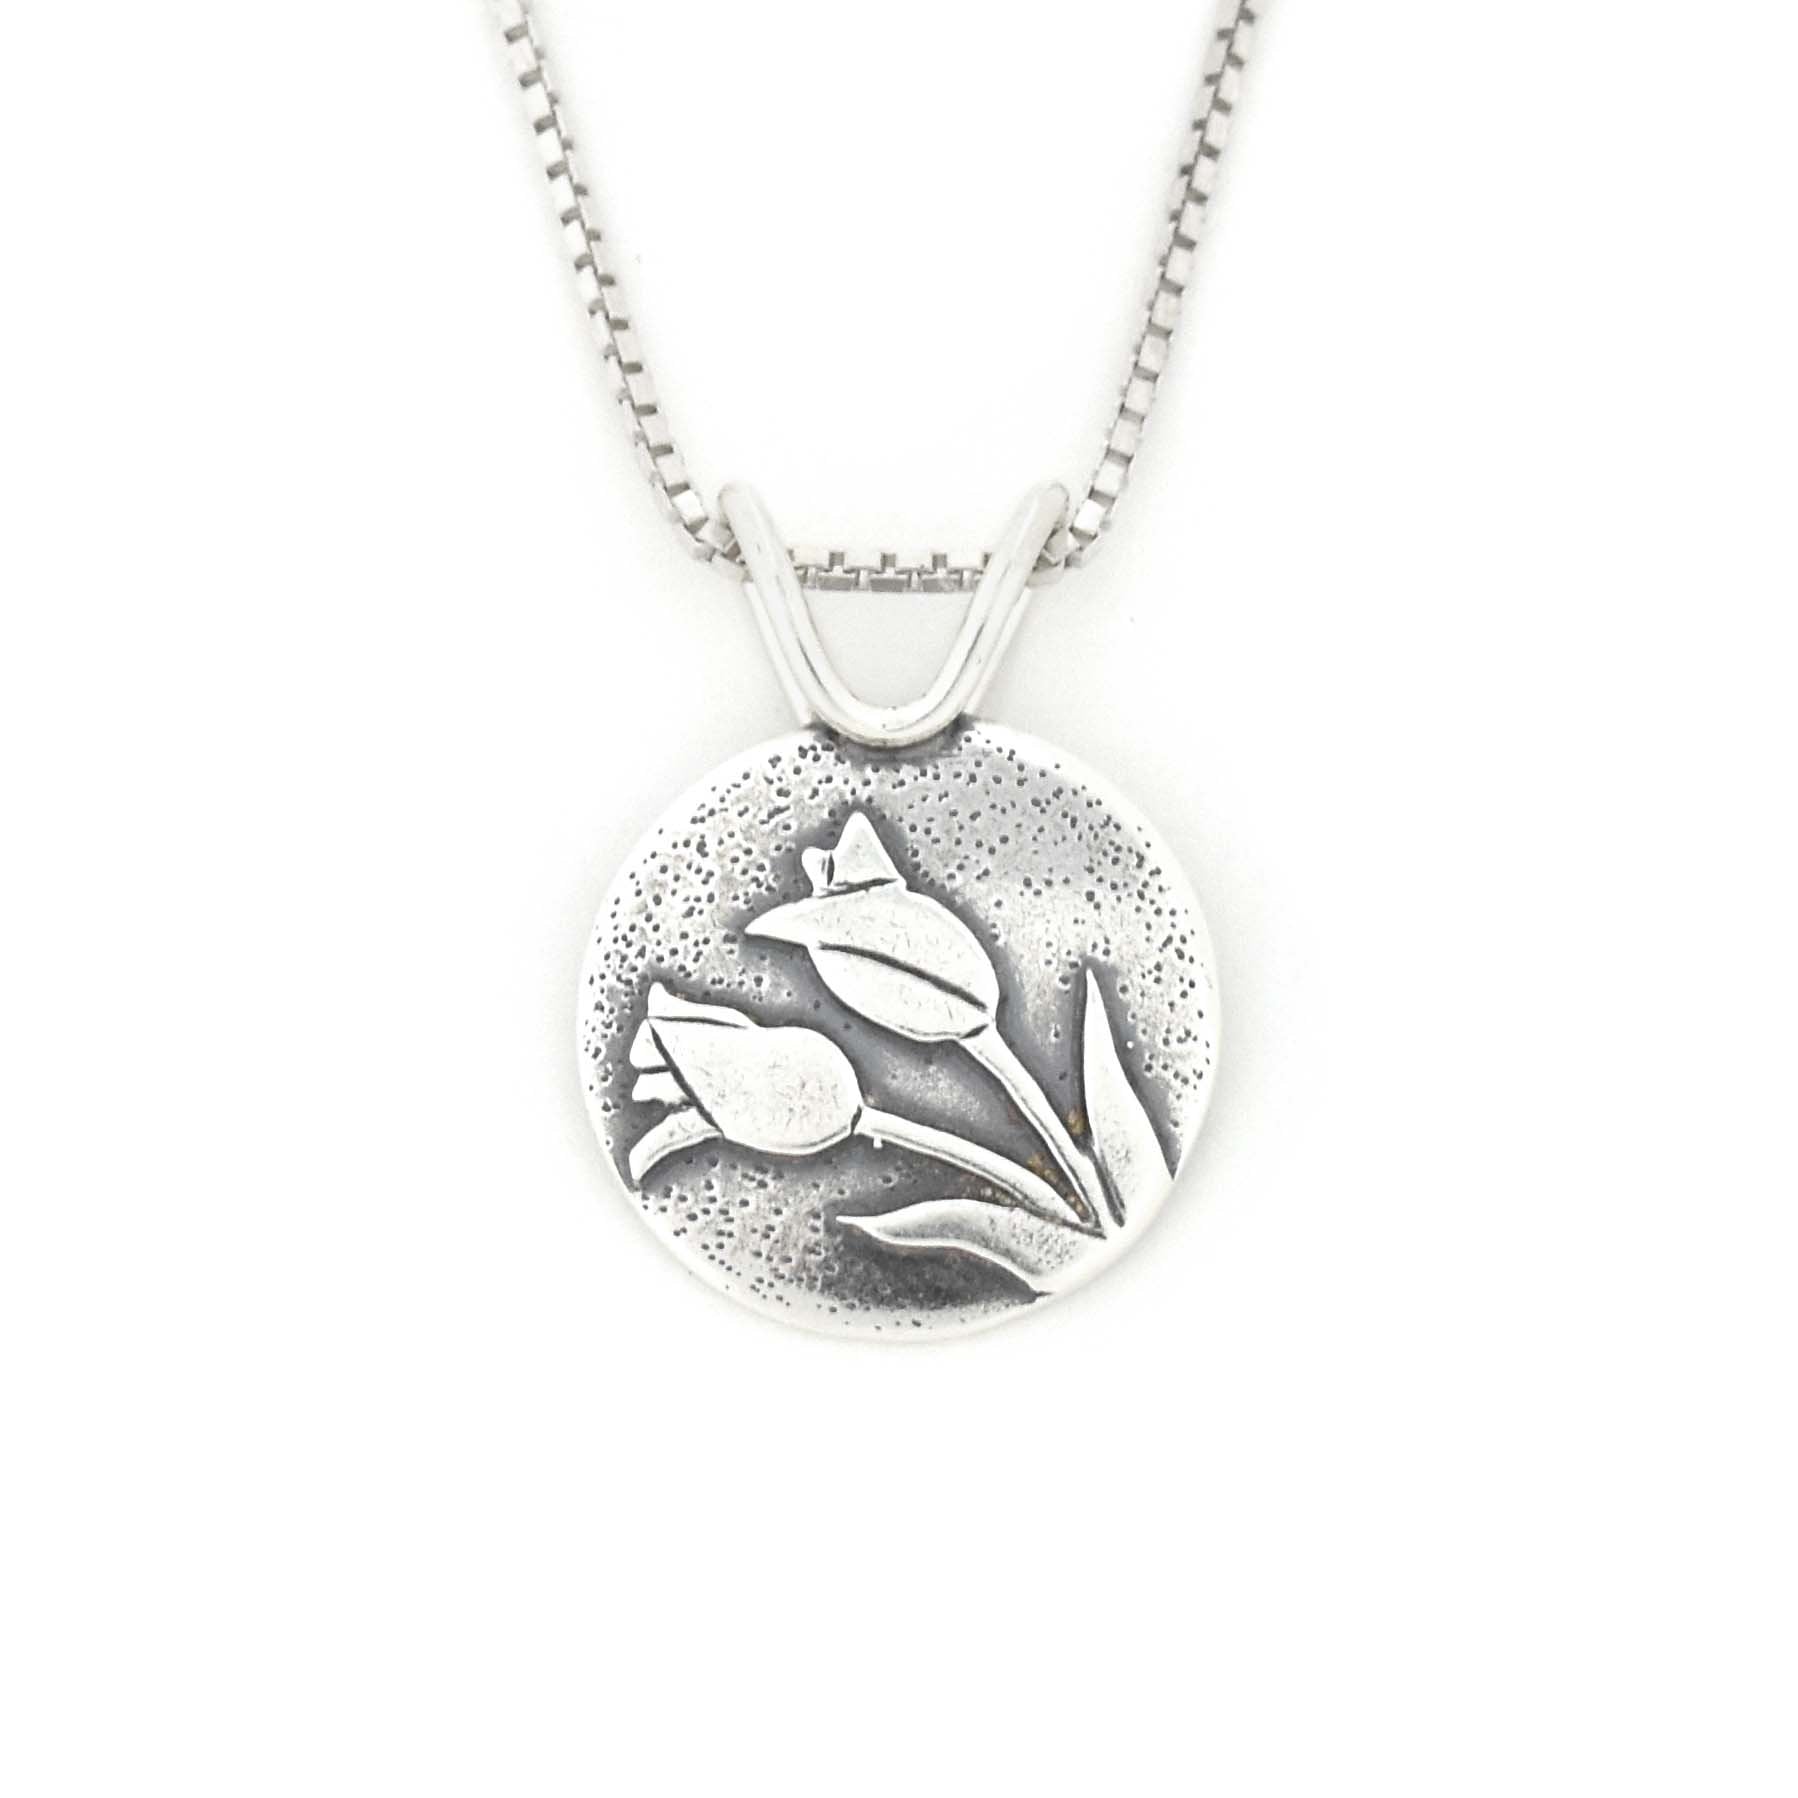 Small Tulip Bouquet Pendant - Silver Pendant   5489 - handmade by Beth Millner Jewelry